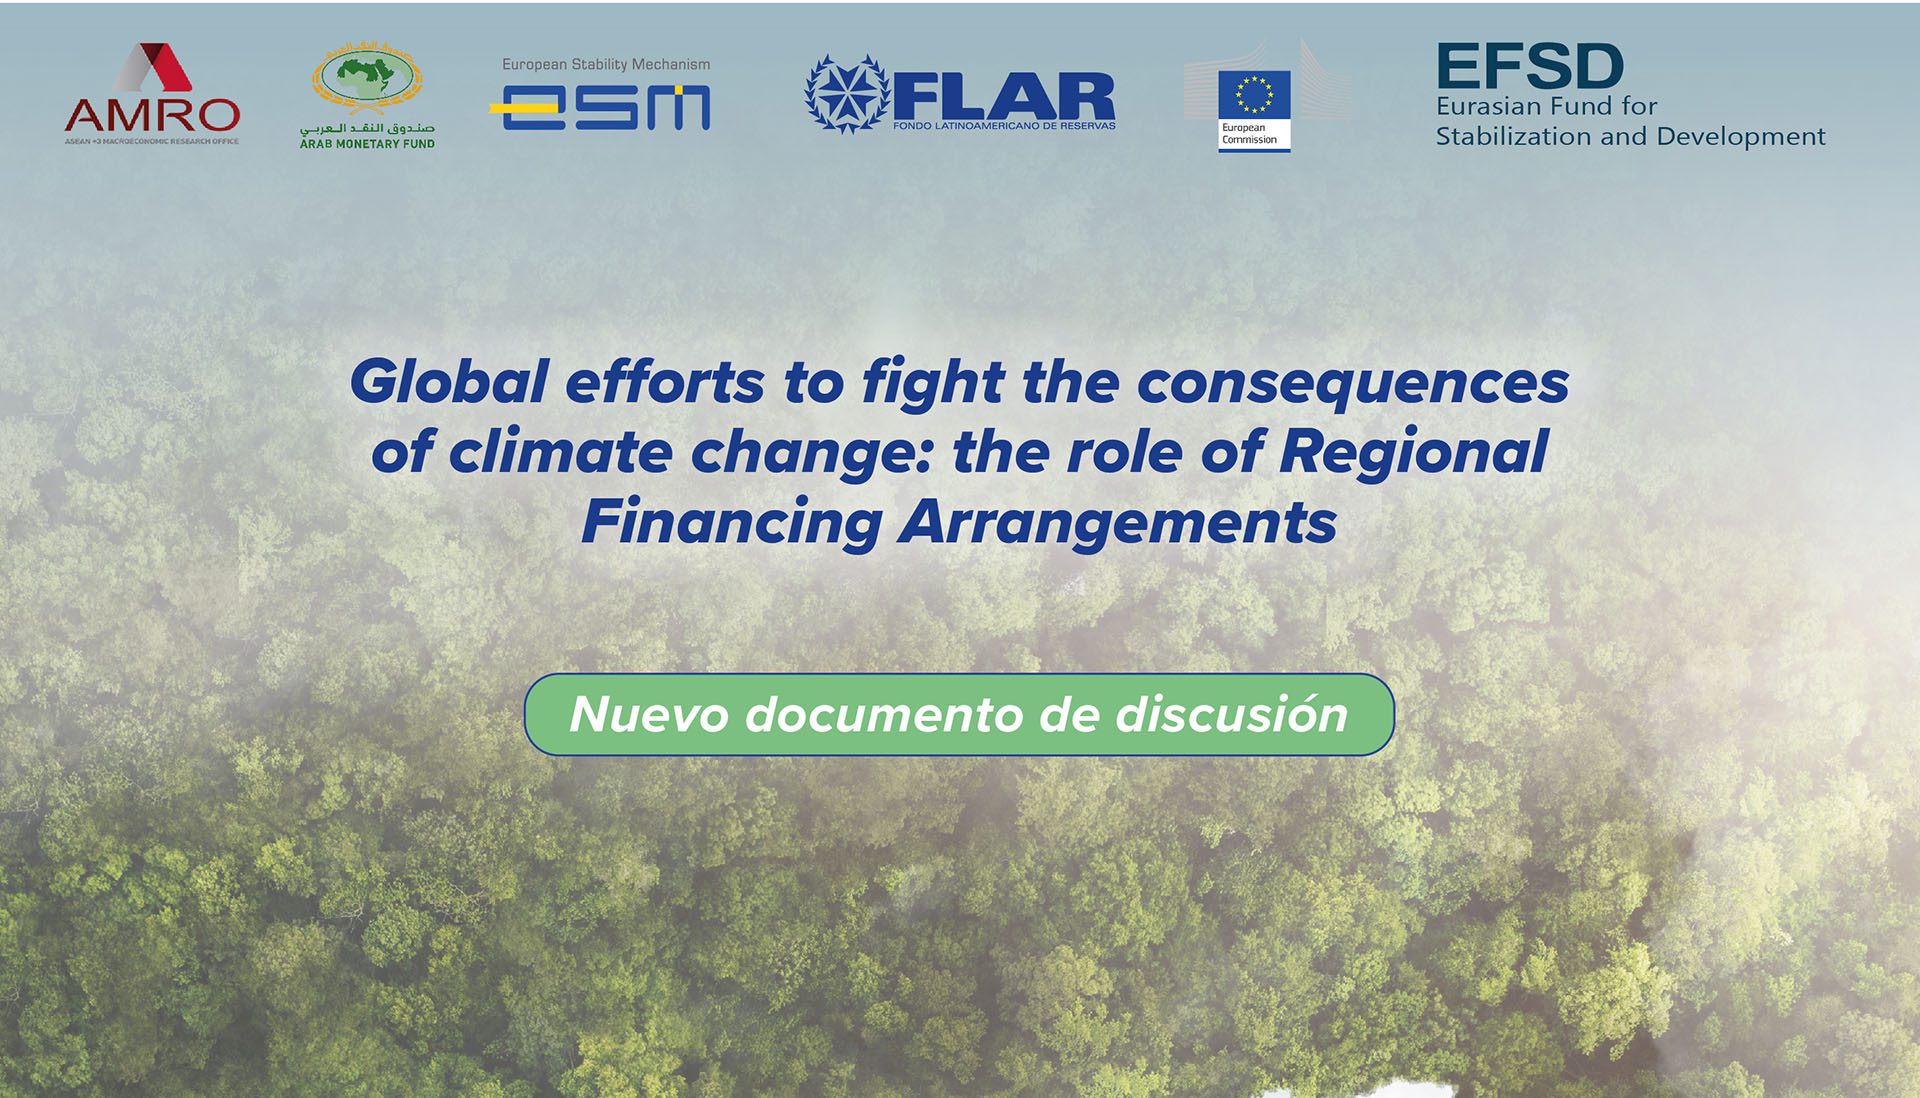 Nuevo documento de discusión | Global efforts to fight the consequences of climate change: the role of Regional Financing Arrangements